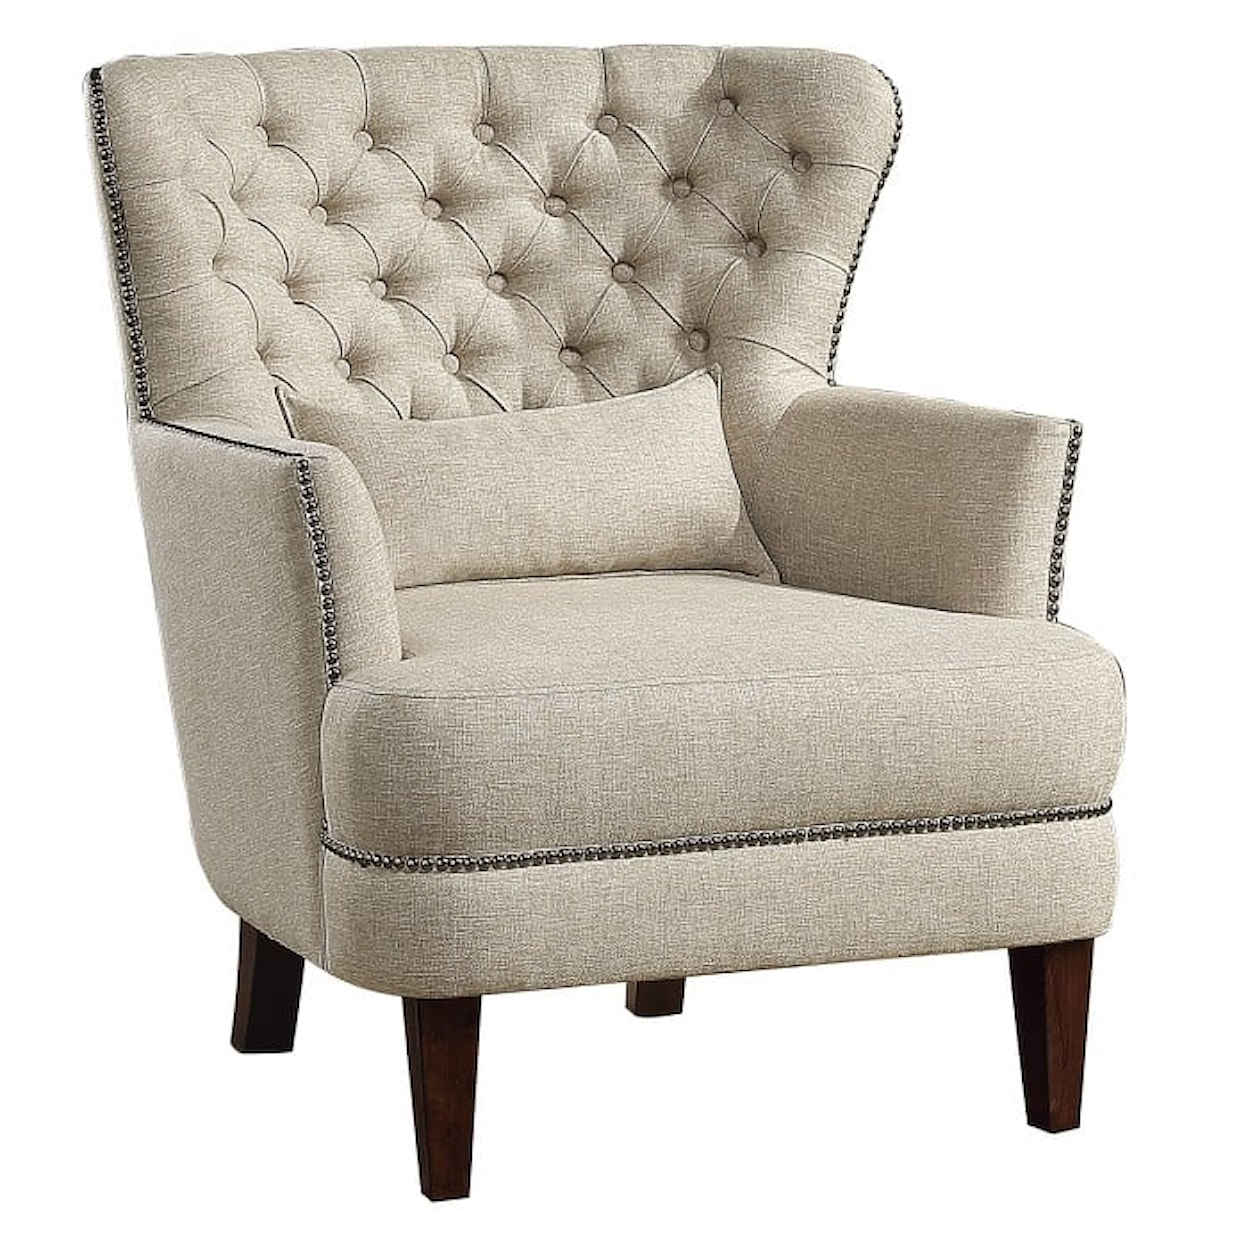 Homelegance Marriana Accent Chair